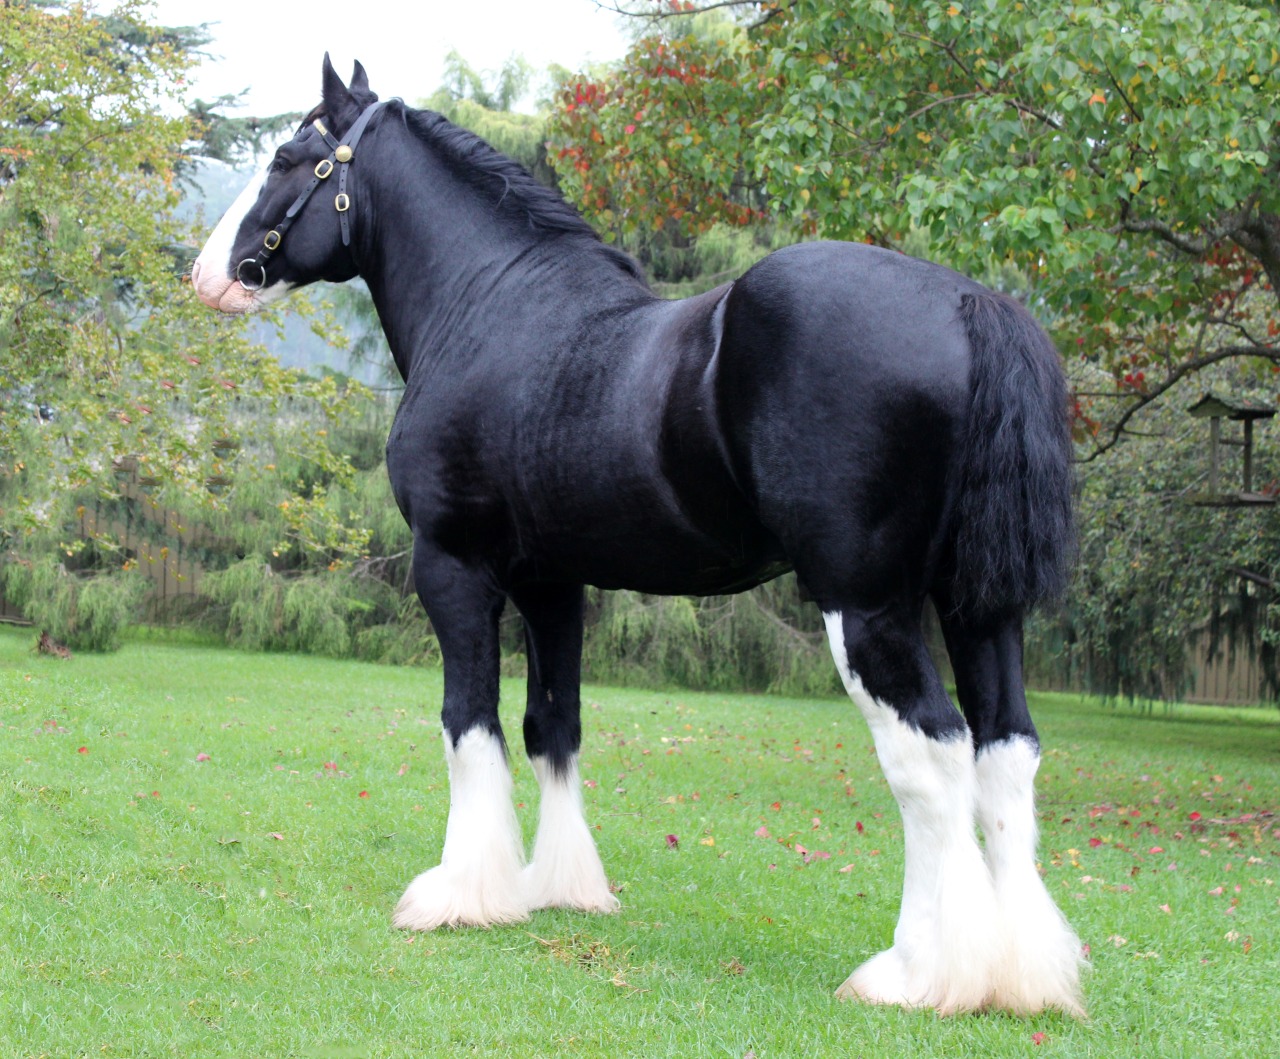 The slower you go the bigger your world gets • Shire horse The Shire horse is a breed of